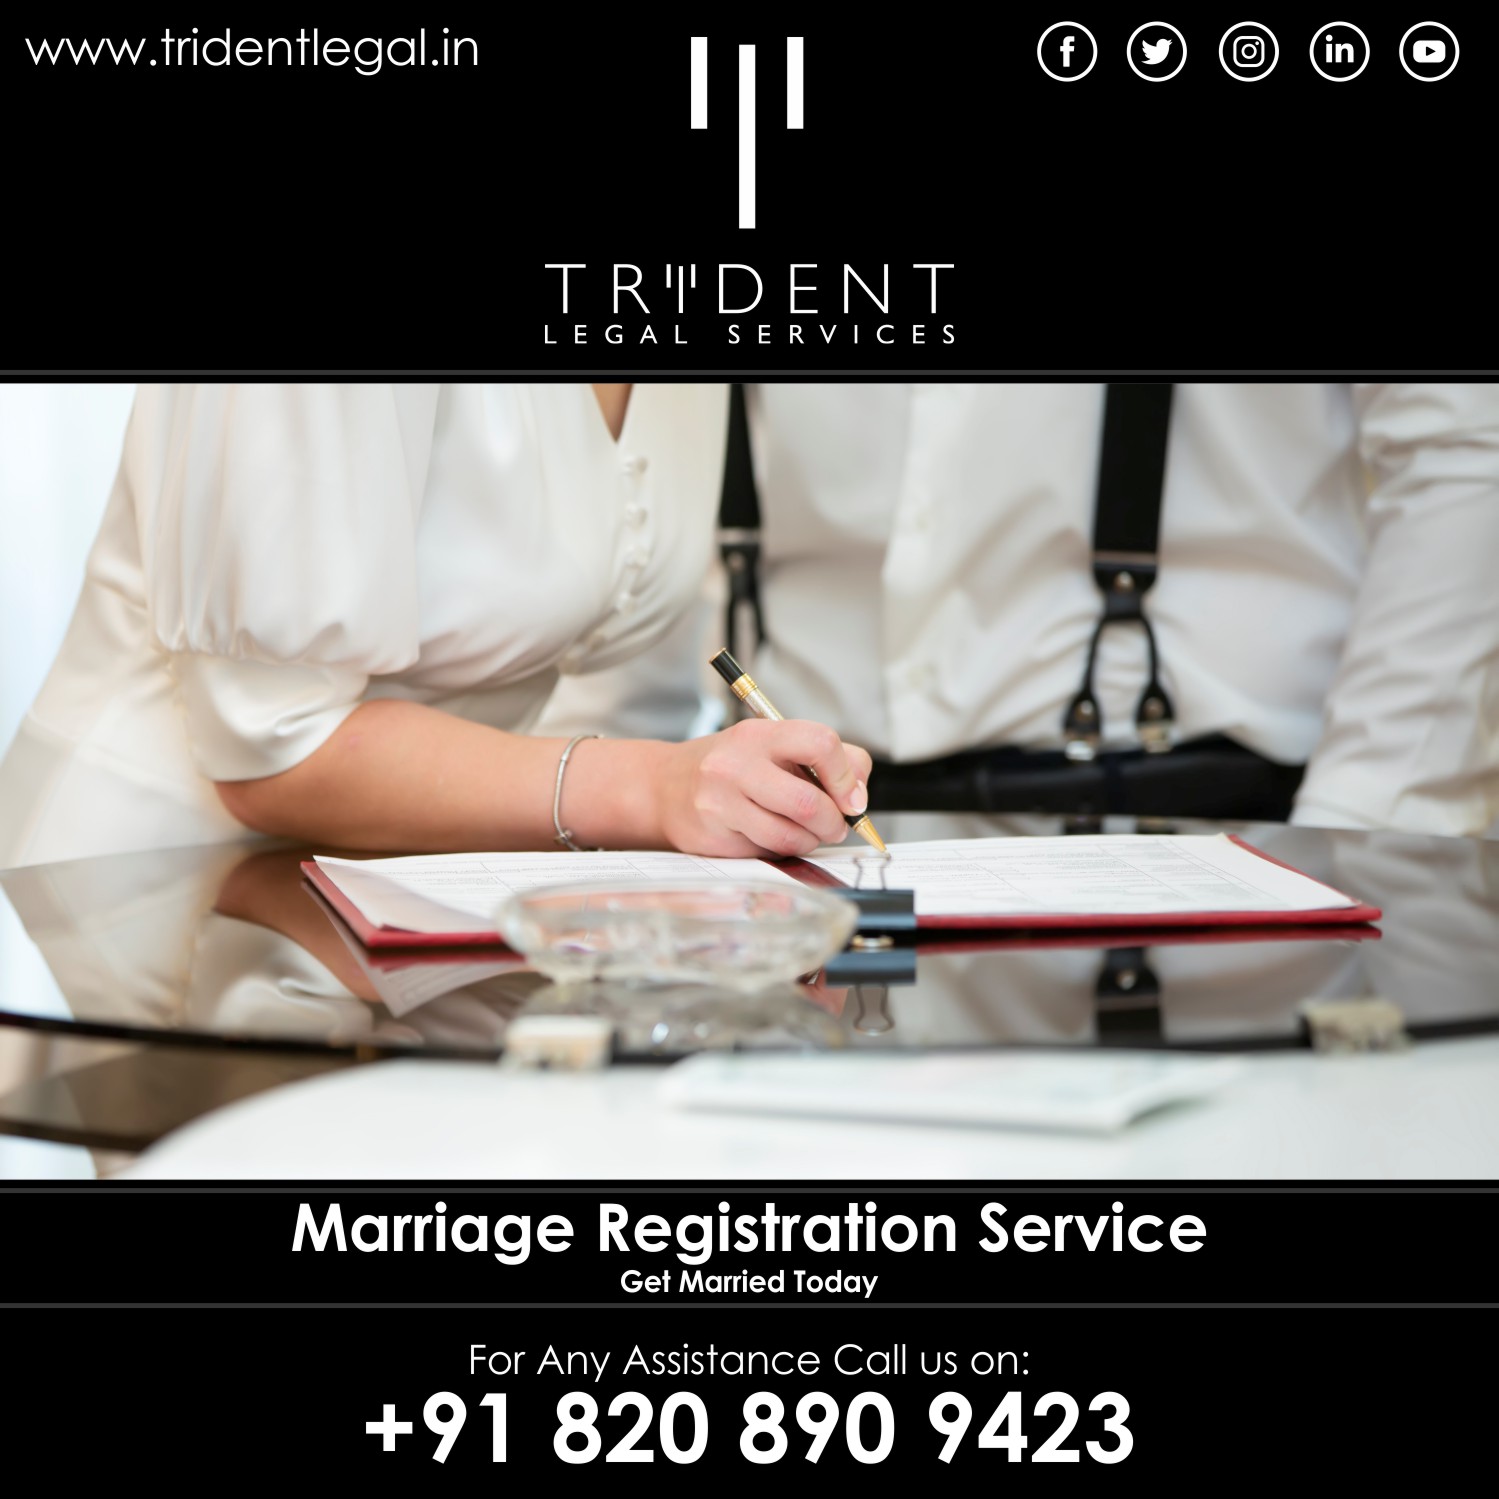 Marriage Registration Service in Pune